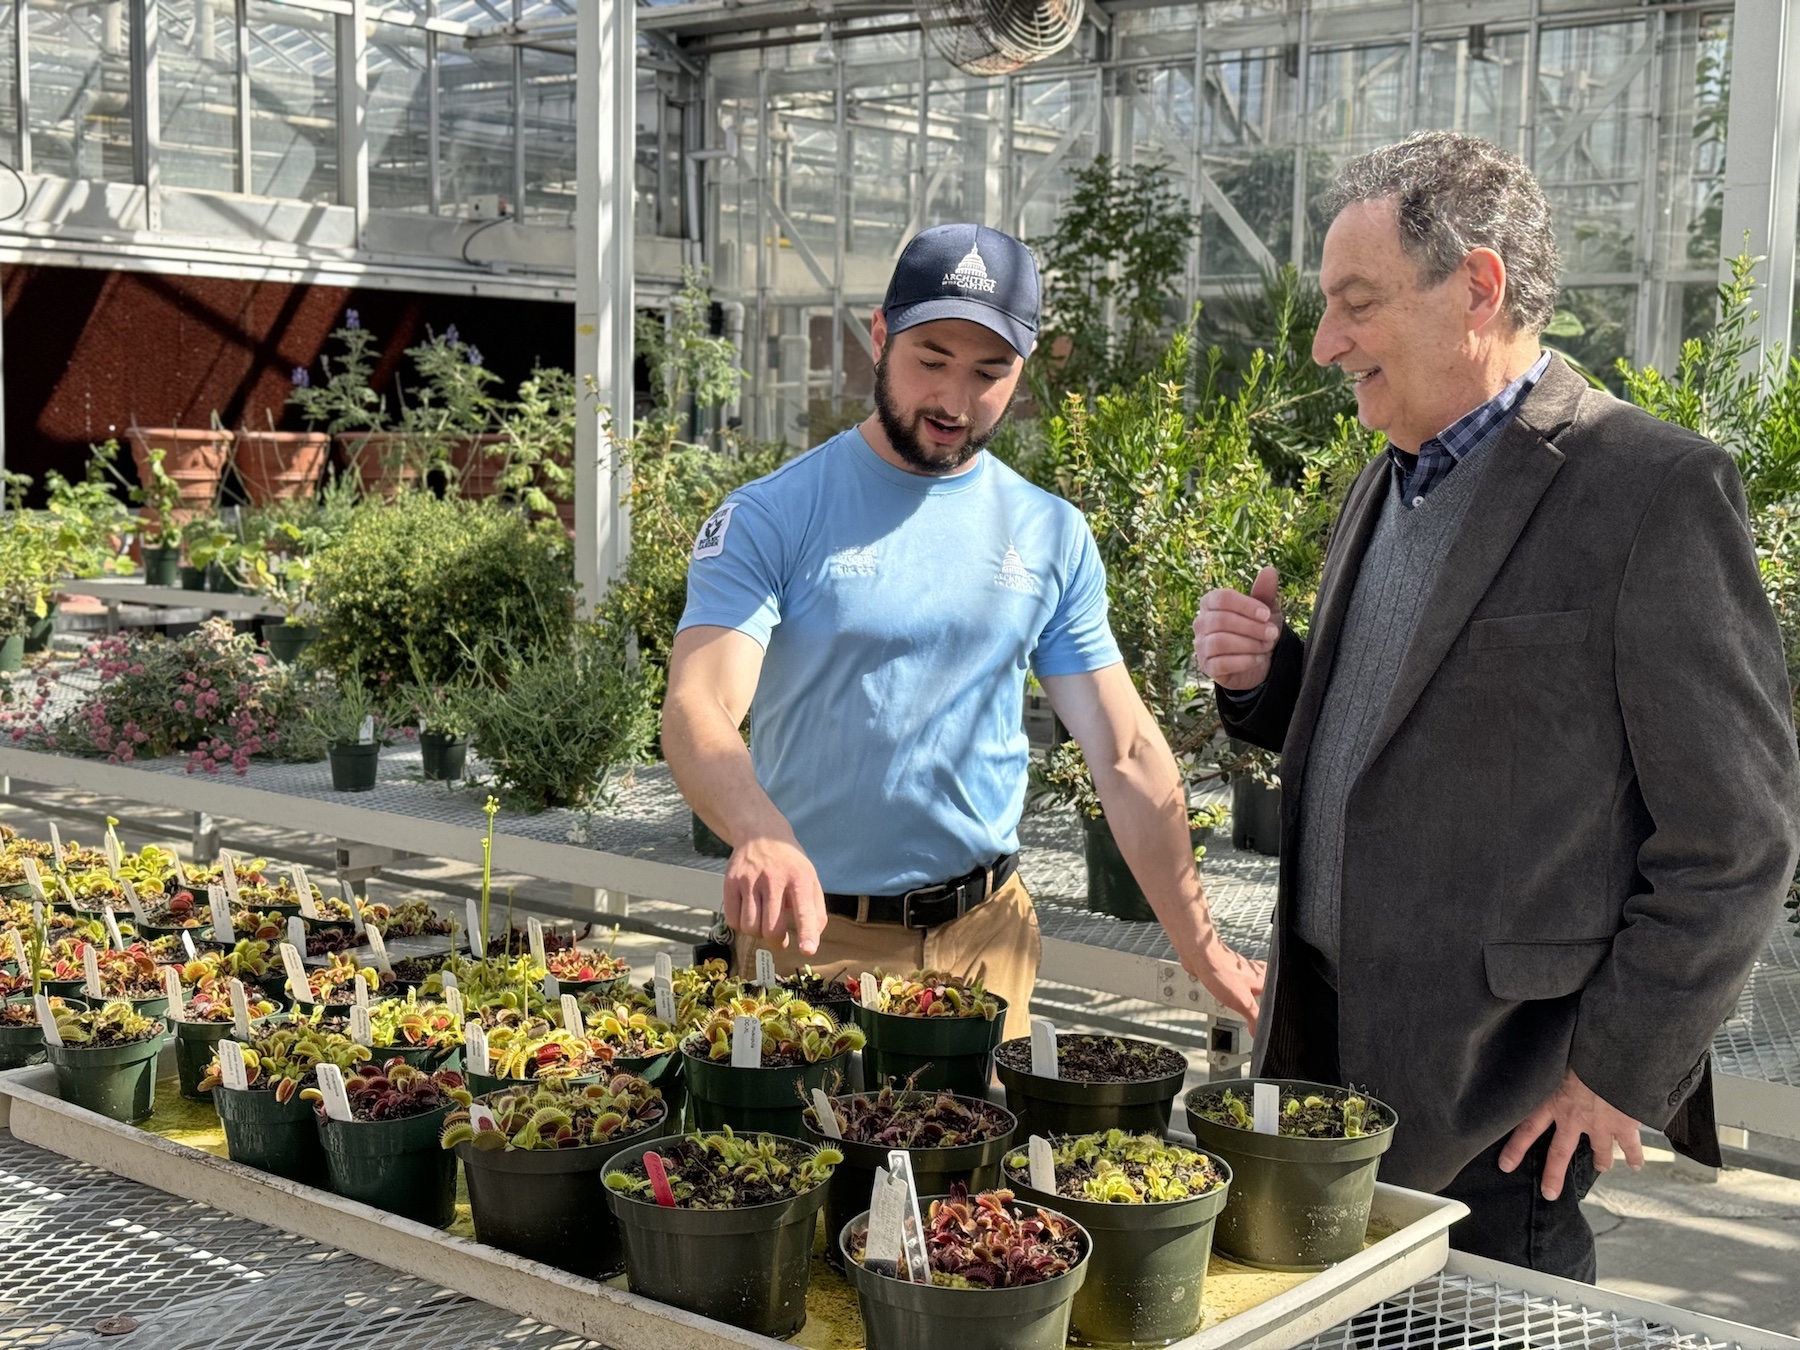 A man wearing a baseball cap points at pots of venus flytrap plants inside a greenhouse. Another man looks on, remarking on them. US Botanical Gardens